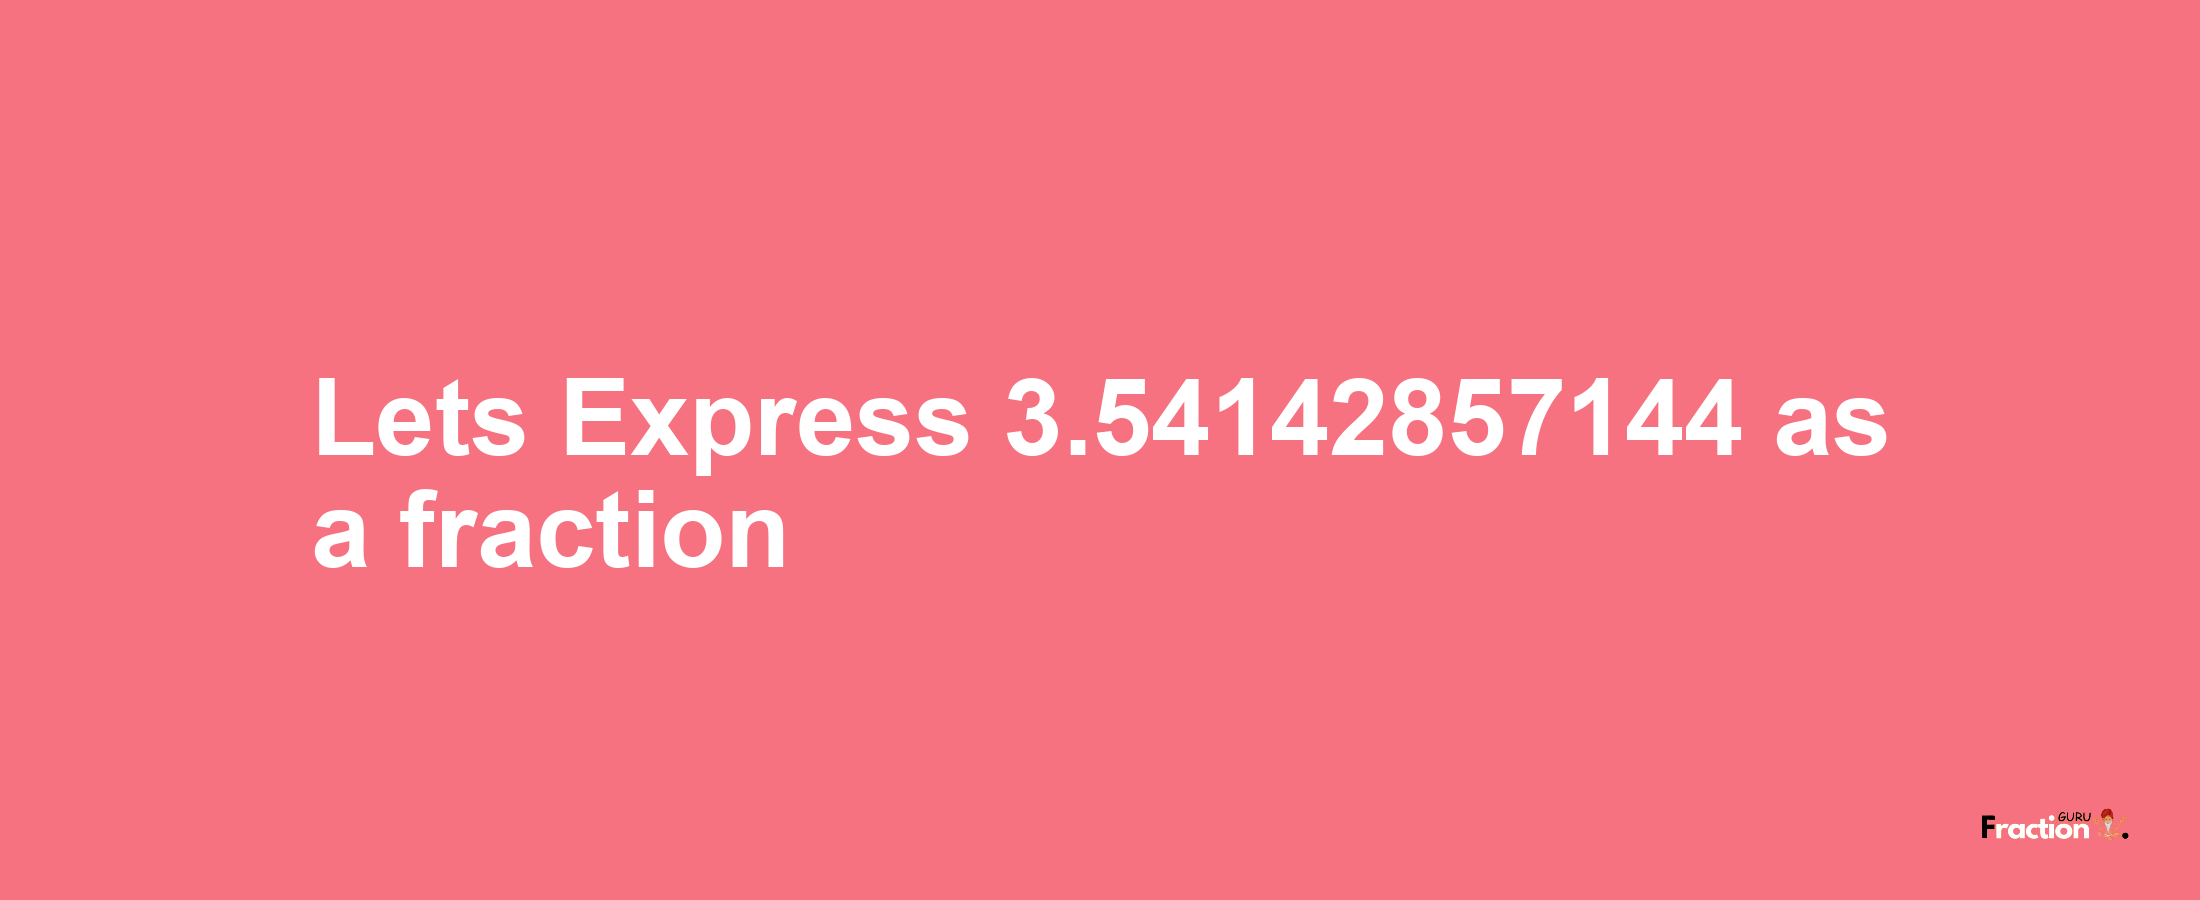 Lets Express 3.54142857144 as afraction